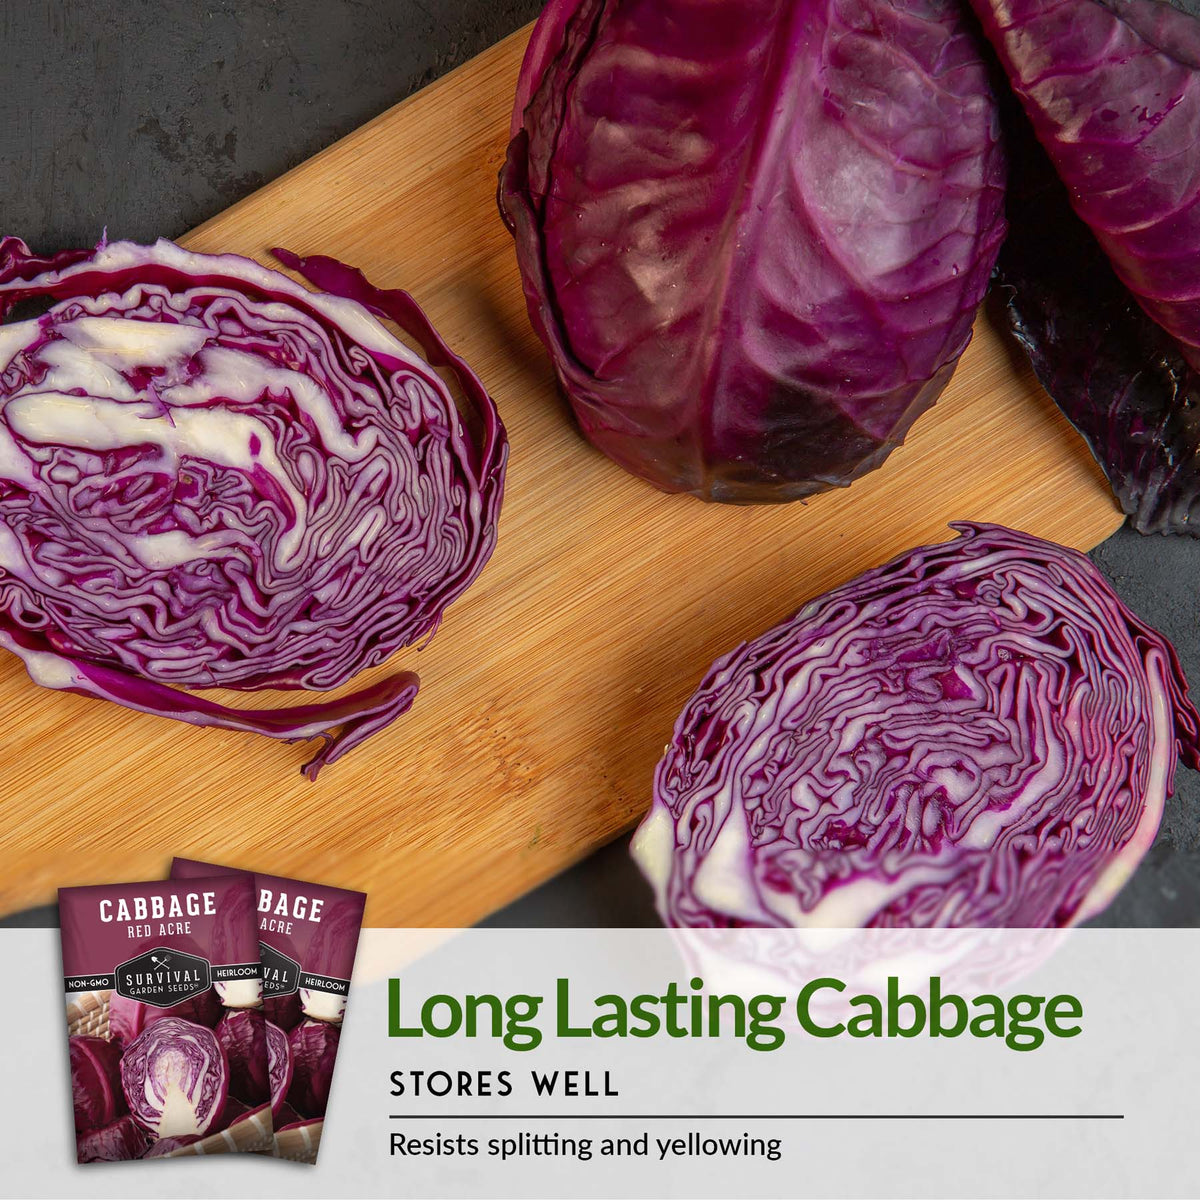 Red Acre Cabbage is long lasting and stores well